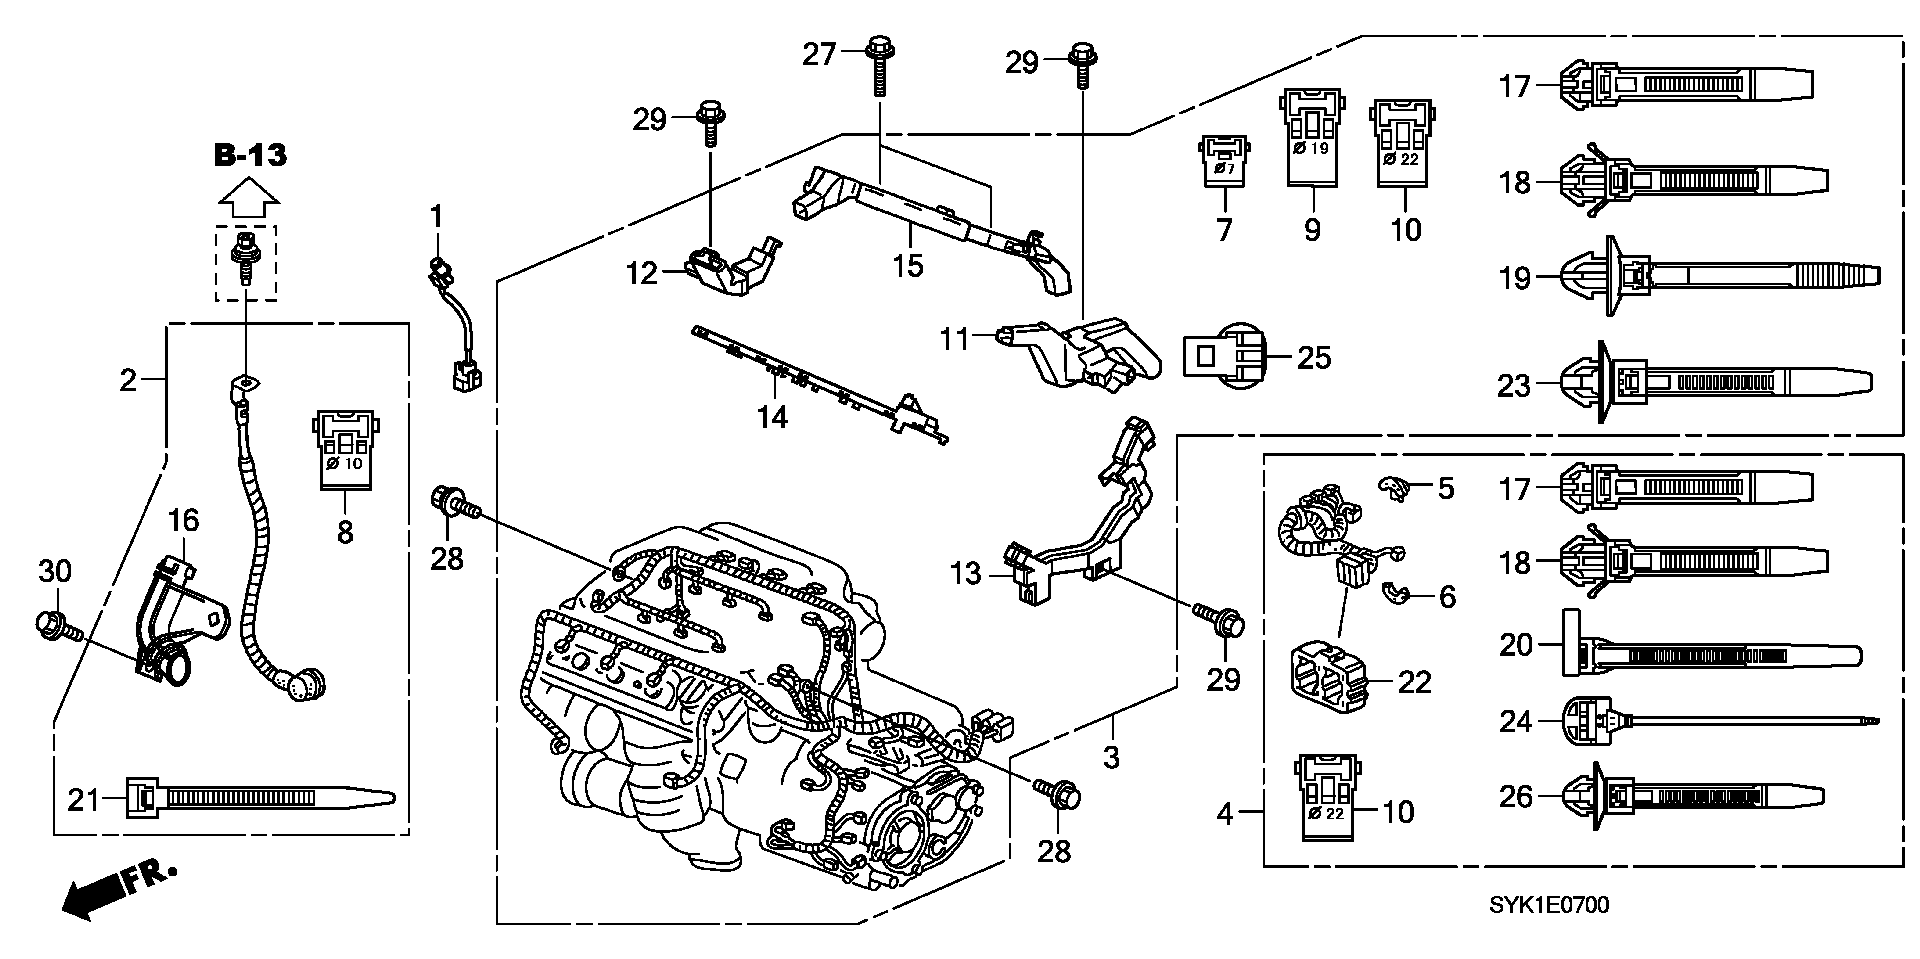 ENGINE WIRE HARNESS(V6)